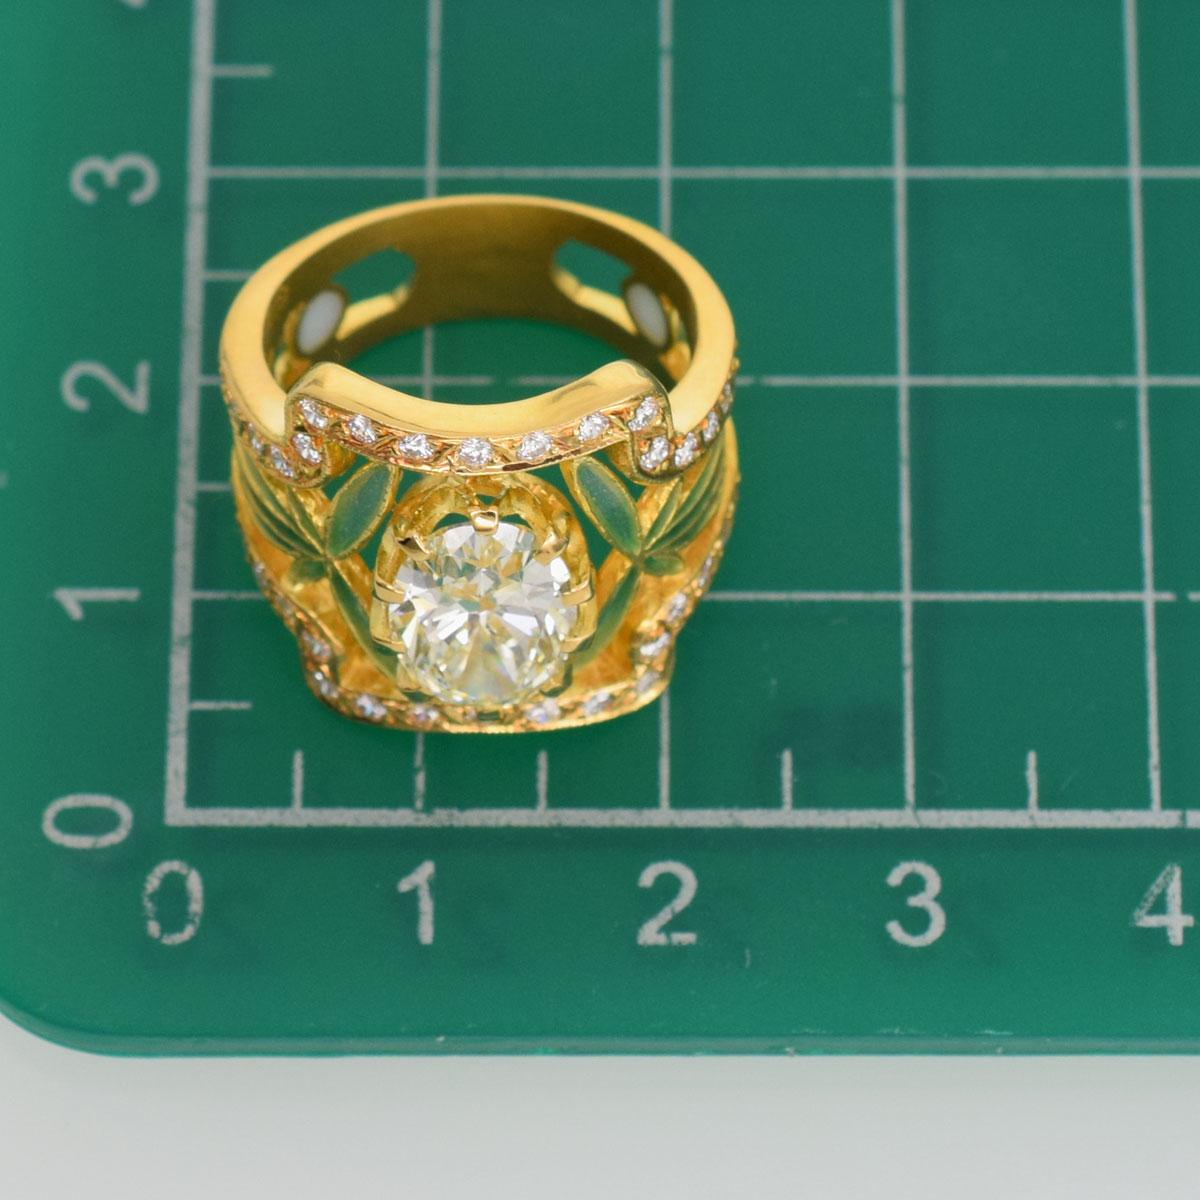 Brand:MASRIERA
Name:Diamond Cloisonne ring
Material :1P diamond (2.29ct S to T Range-VS 2),
side diamond, cloisonne, 750 K18 YG Yellow Gold
Comes with:MASRIERA box, case, GIA certificate (April 2019), repair receipt (March 2019)
Ring size:British &